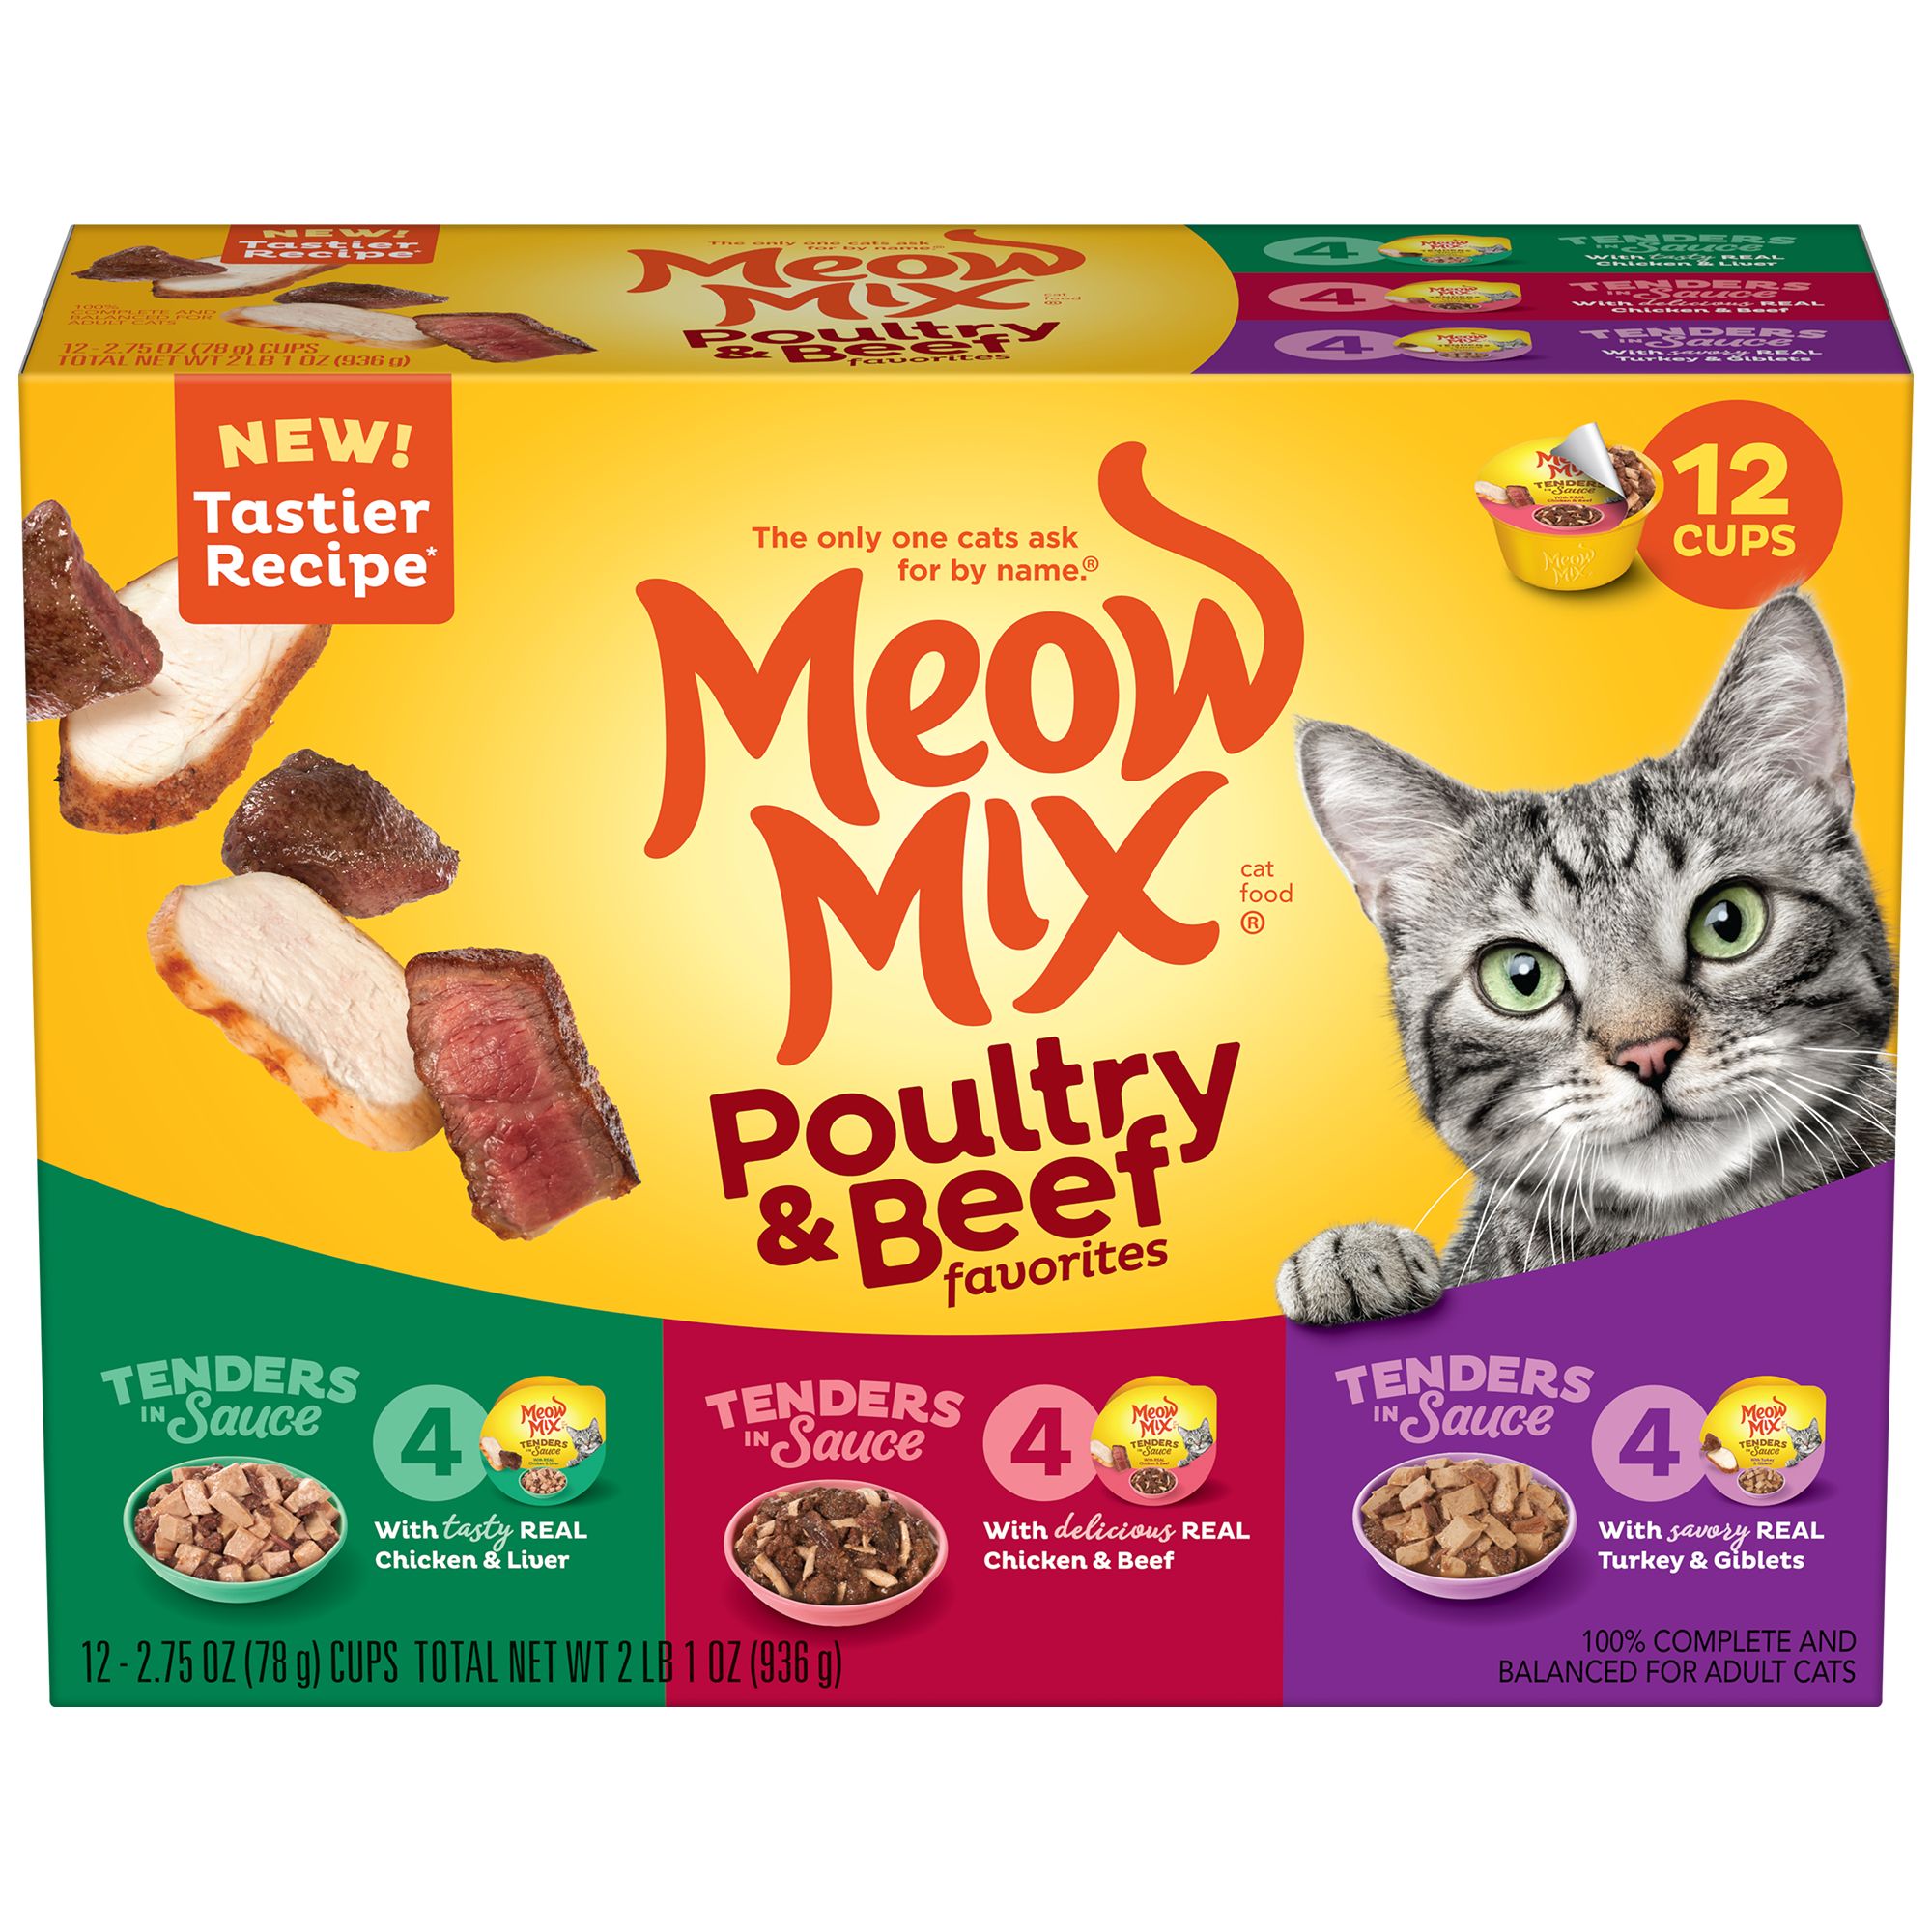 Meow Mix poultry and beef